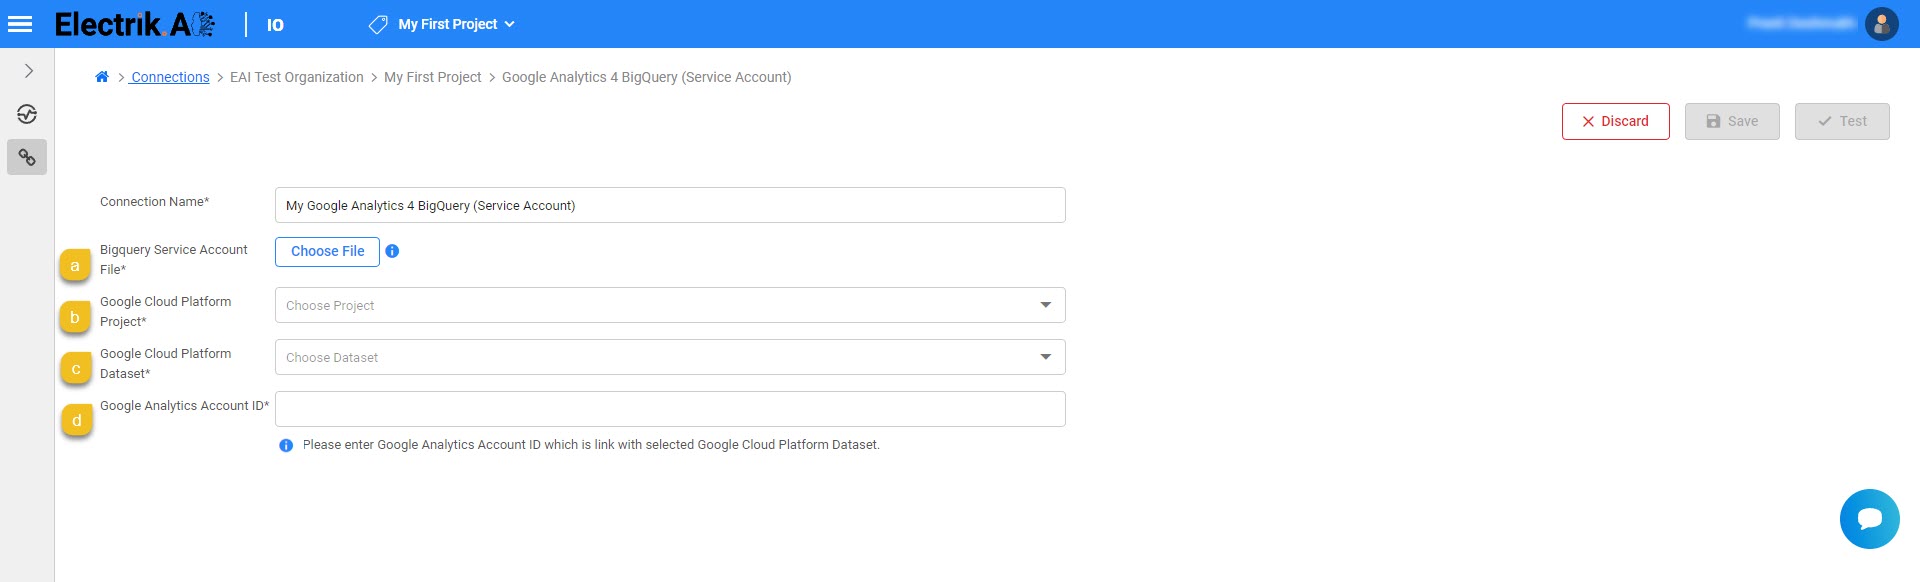 Provide your Google Analytics 4 BigQuery (Service Account) details